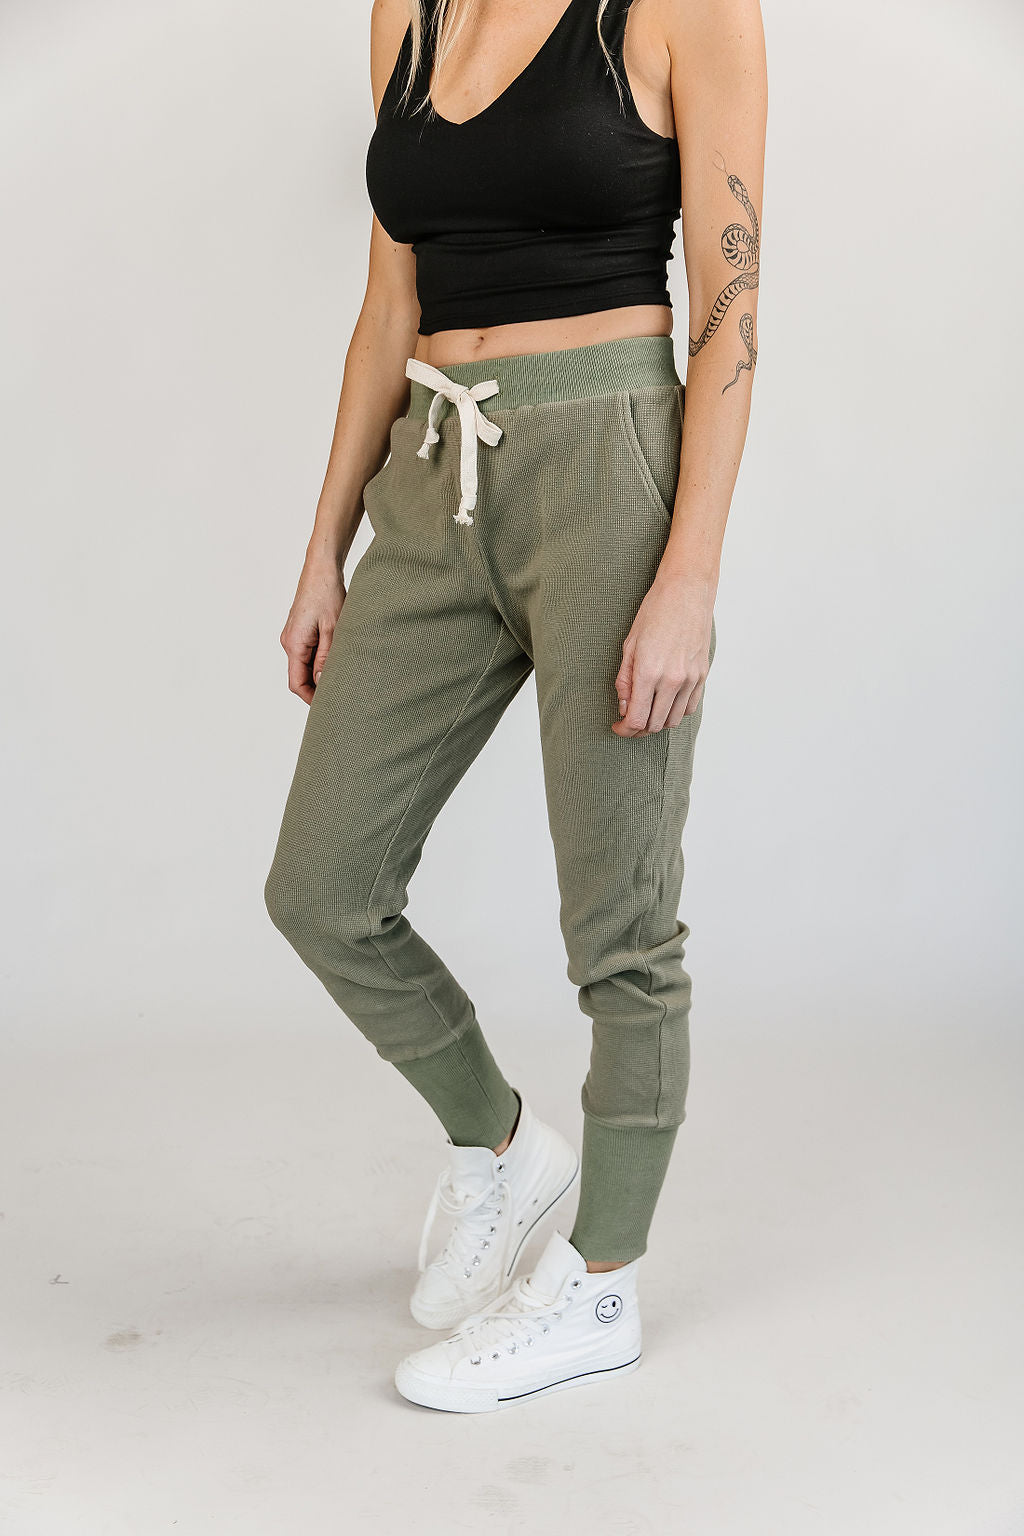 Ampersand Avenue Waffle Knit Jogger - Willow